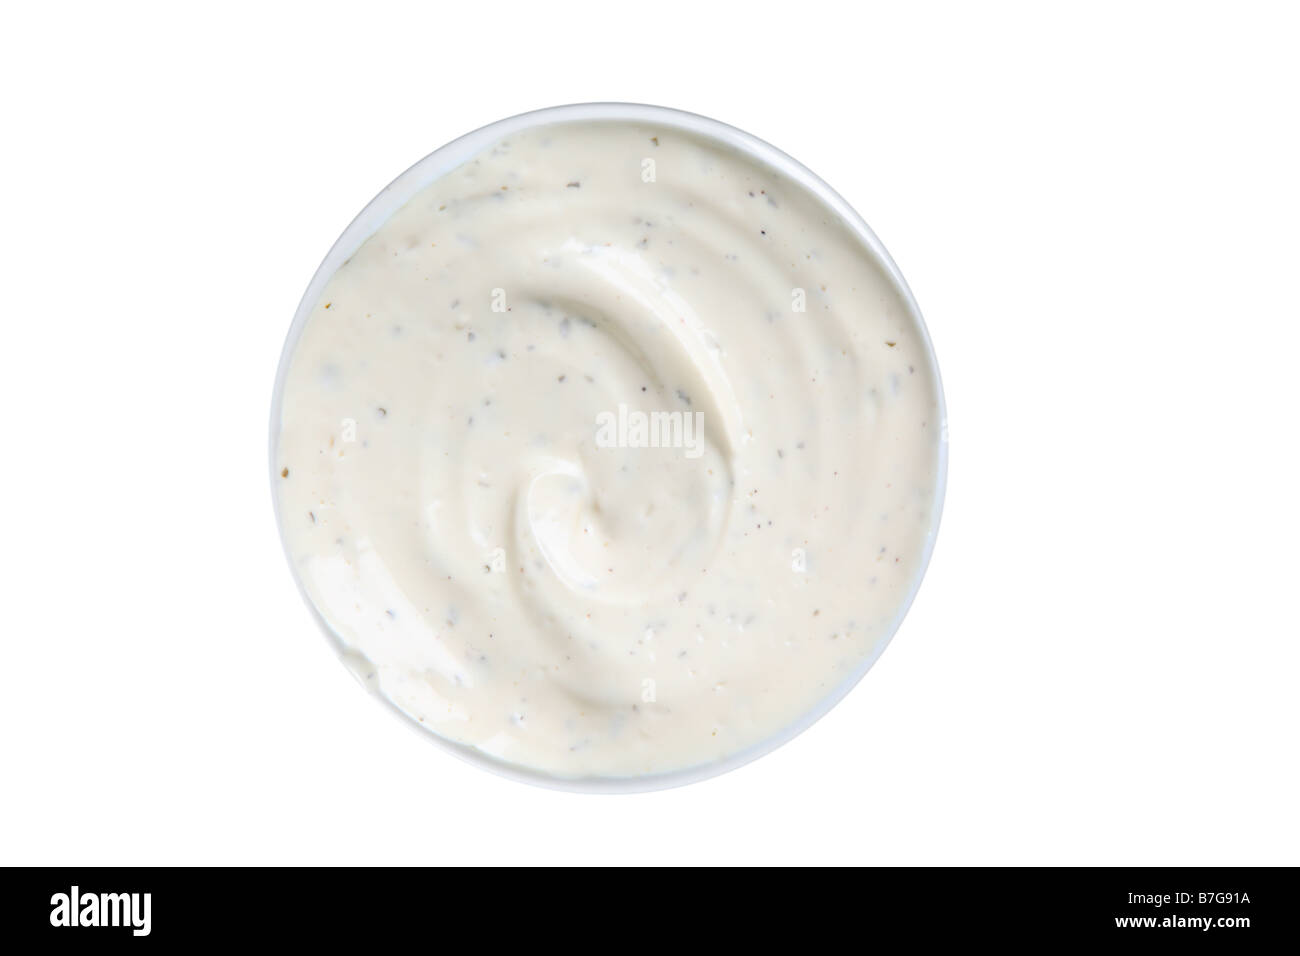 Bowl of ranch dip cut out on white background Stock Photo